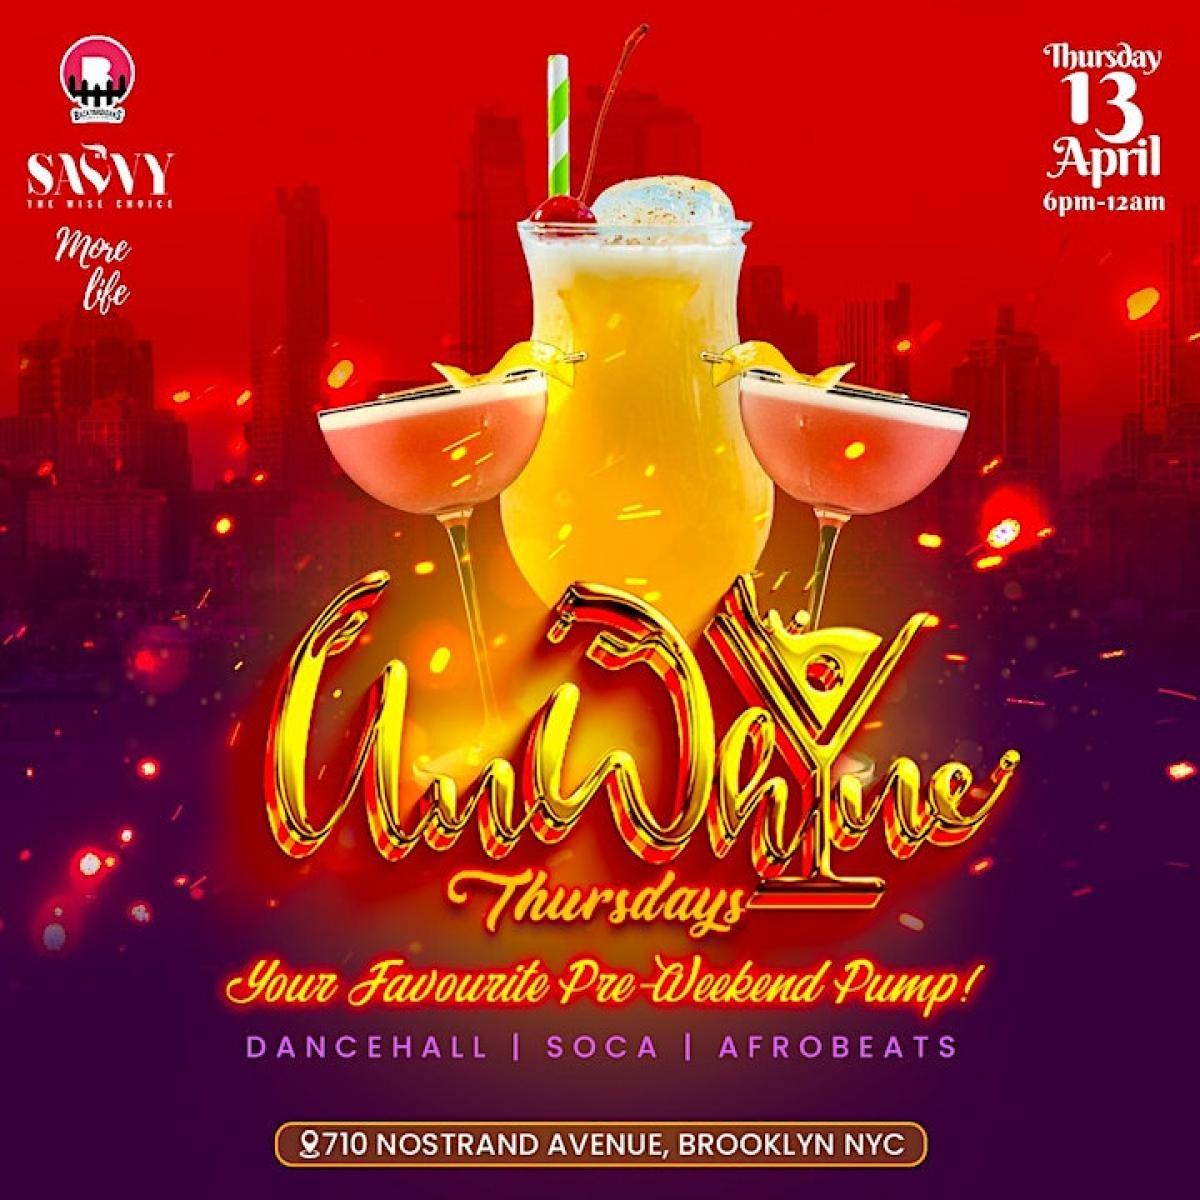 UnWhine Thursdays! flyer or graphic.